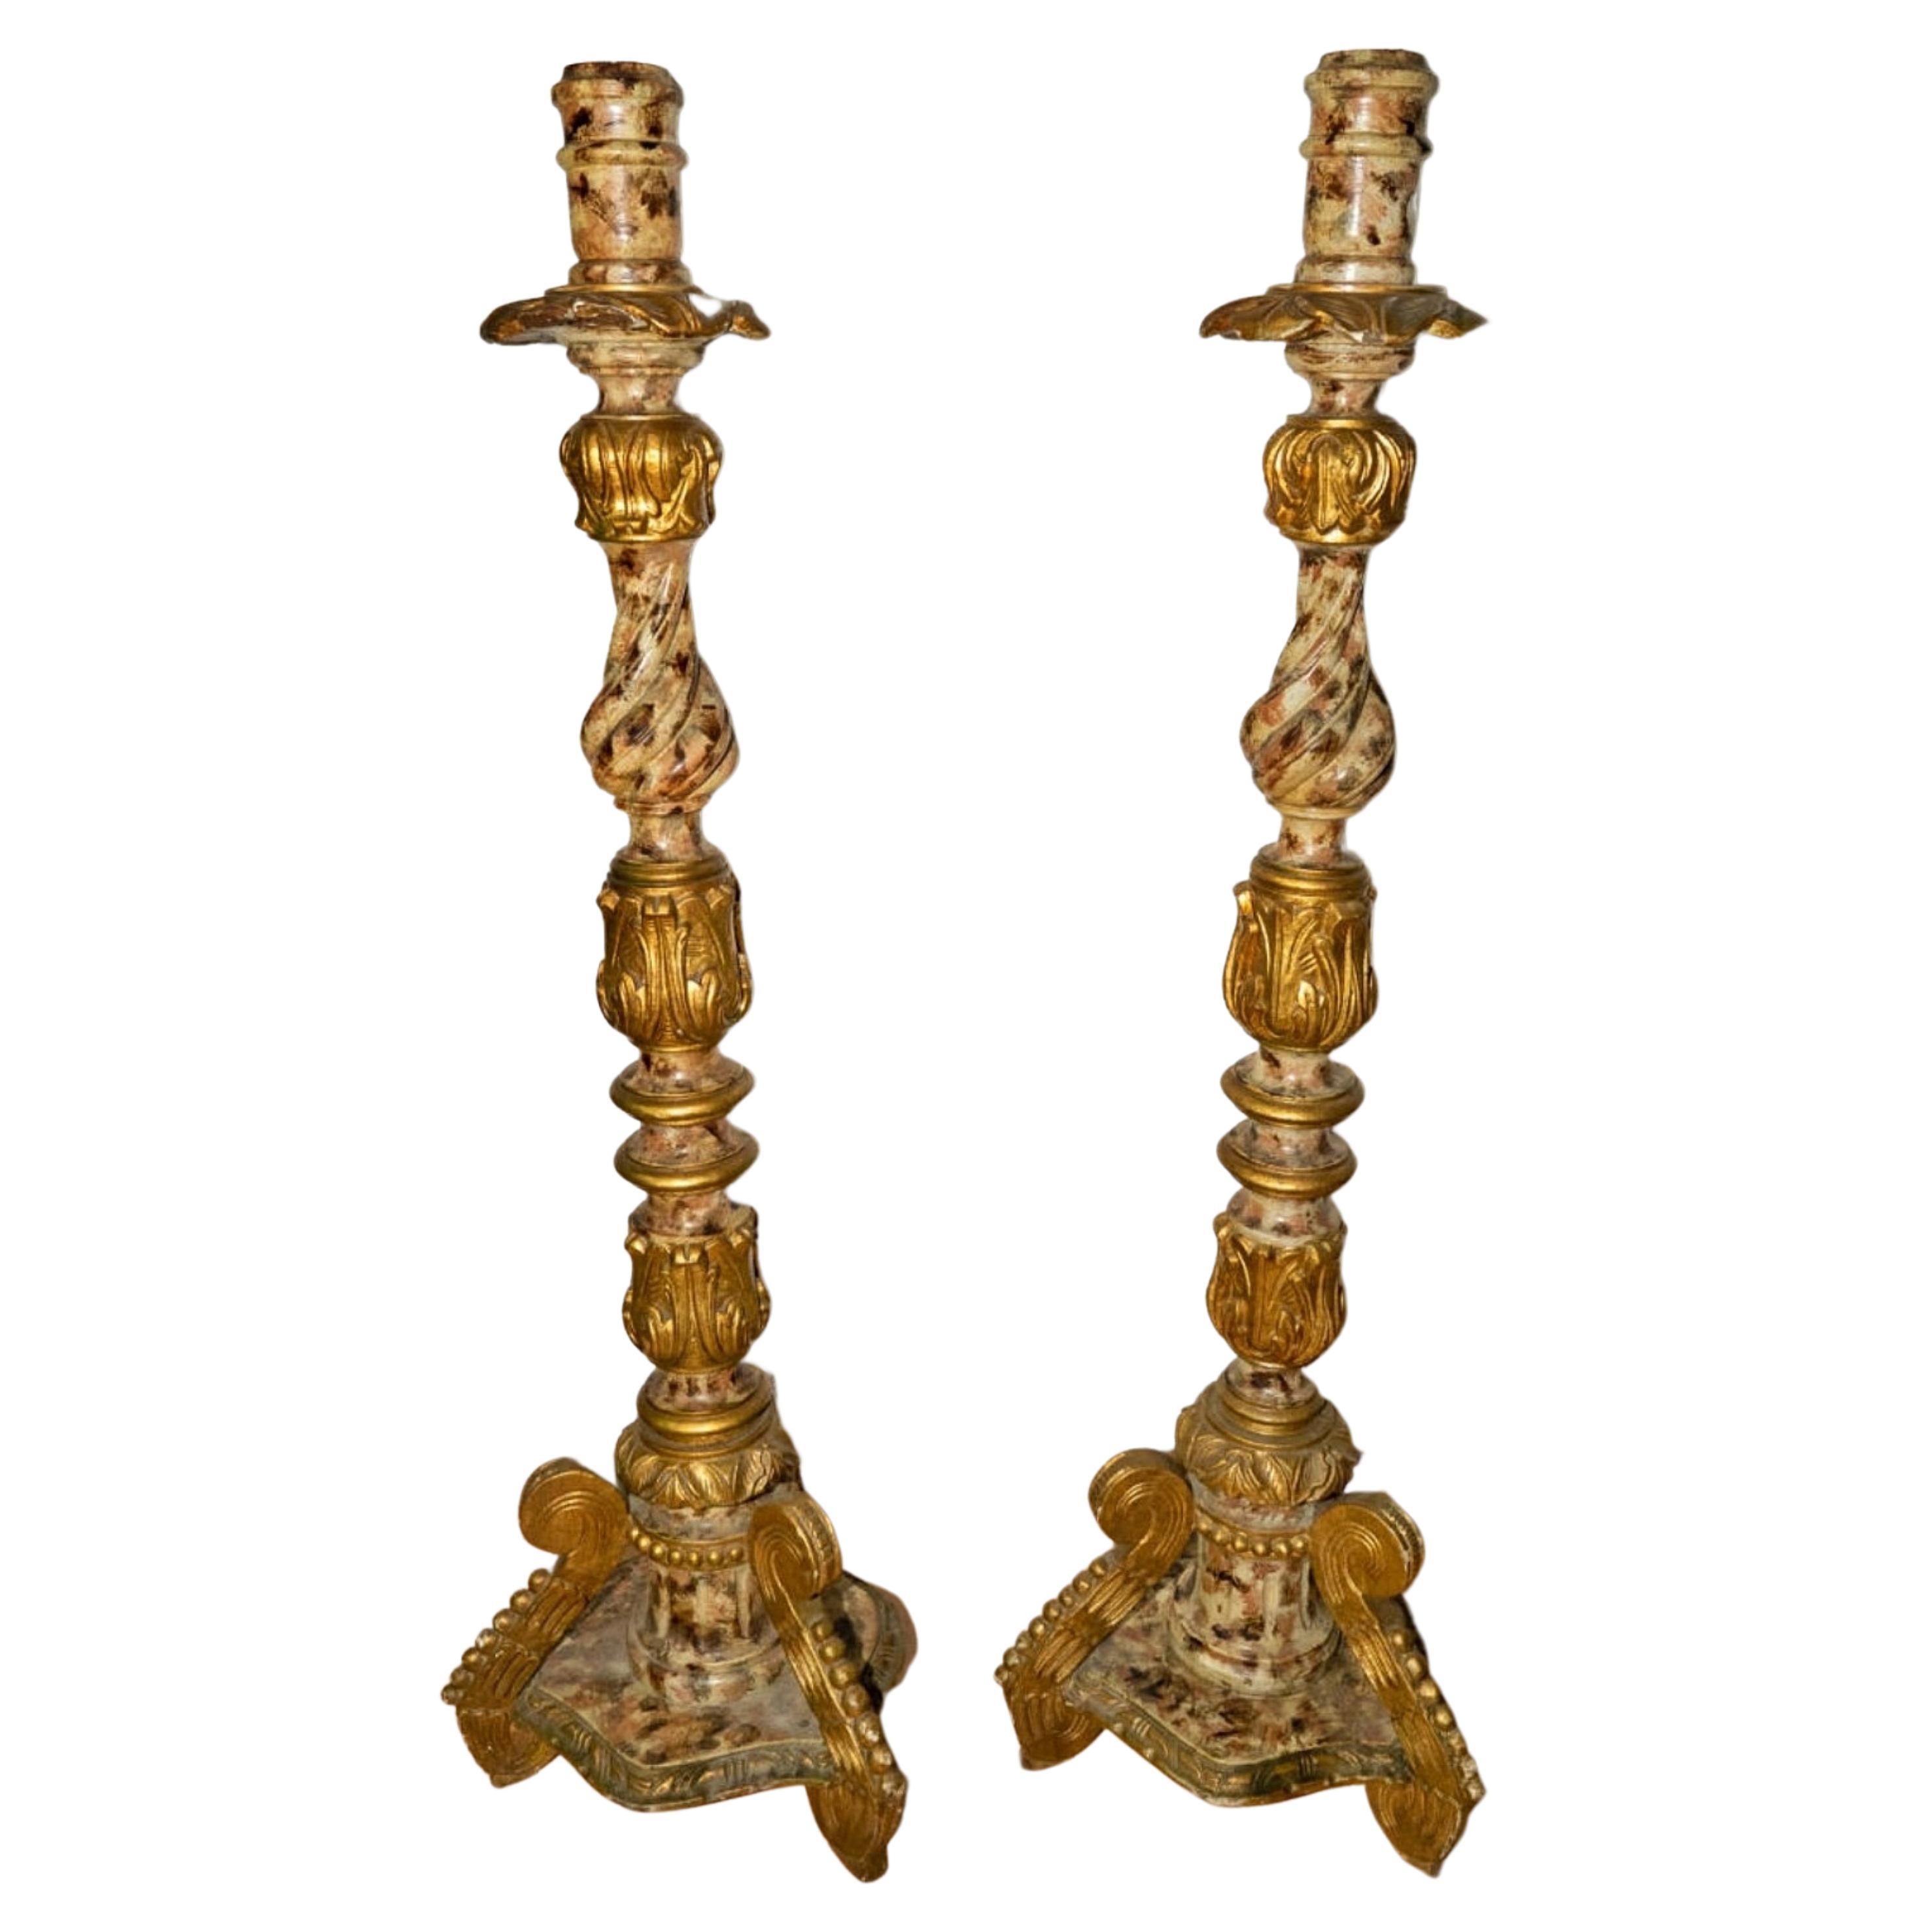 Pair of Spanish Candlesticks from the 18th Century